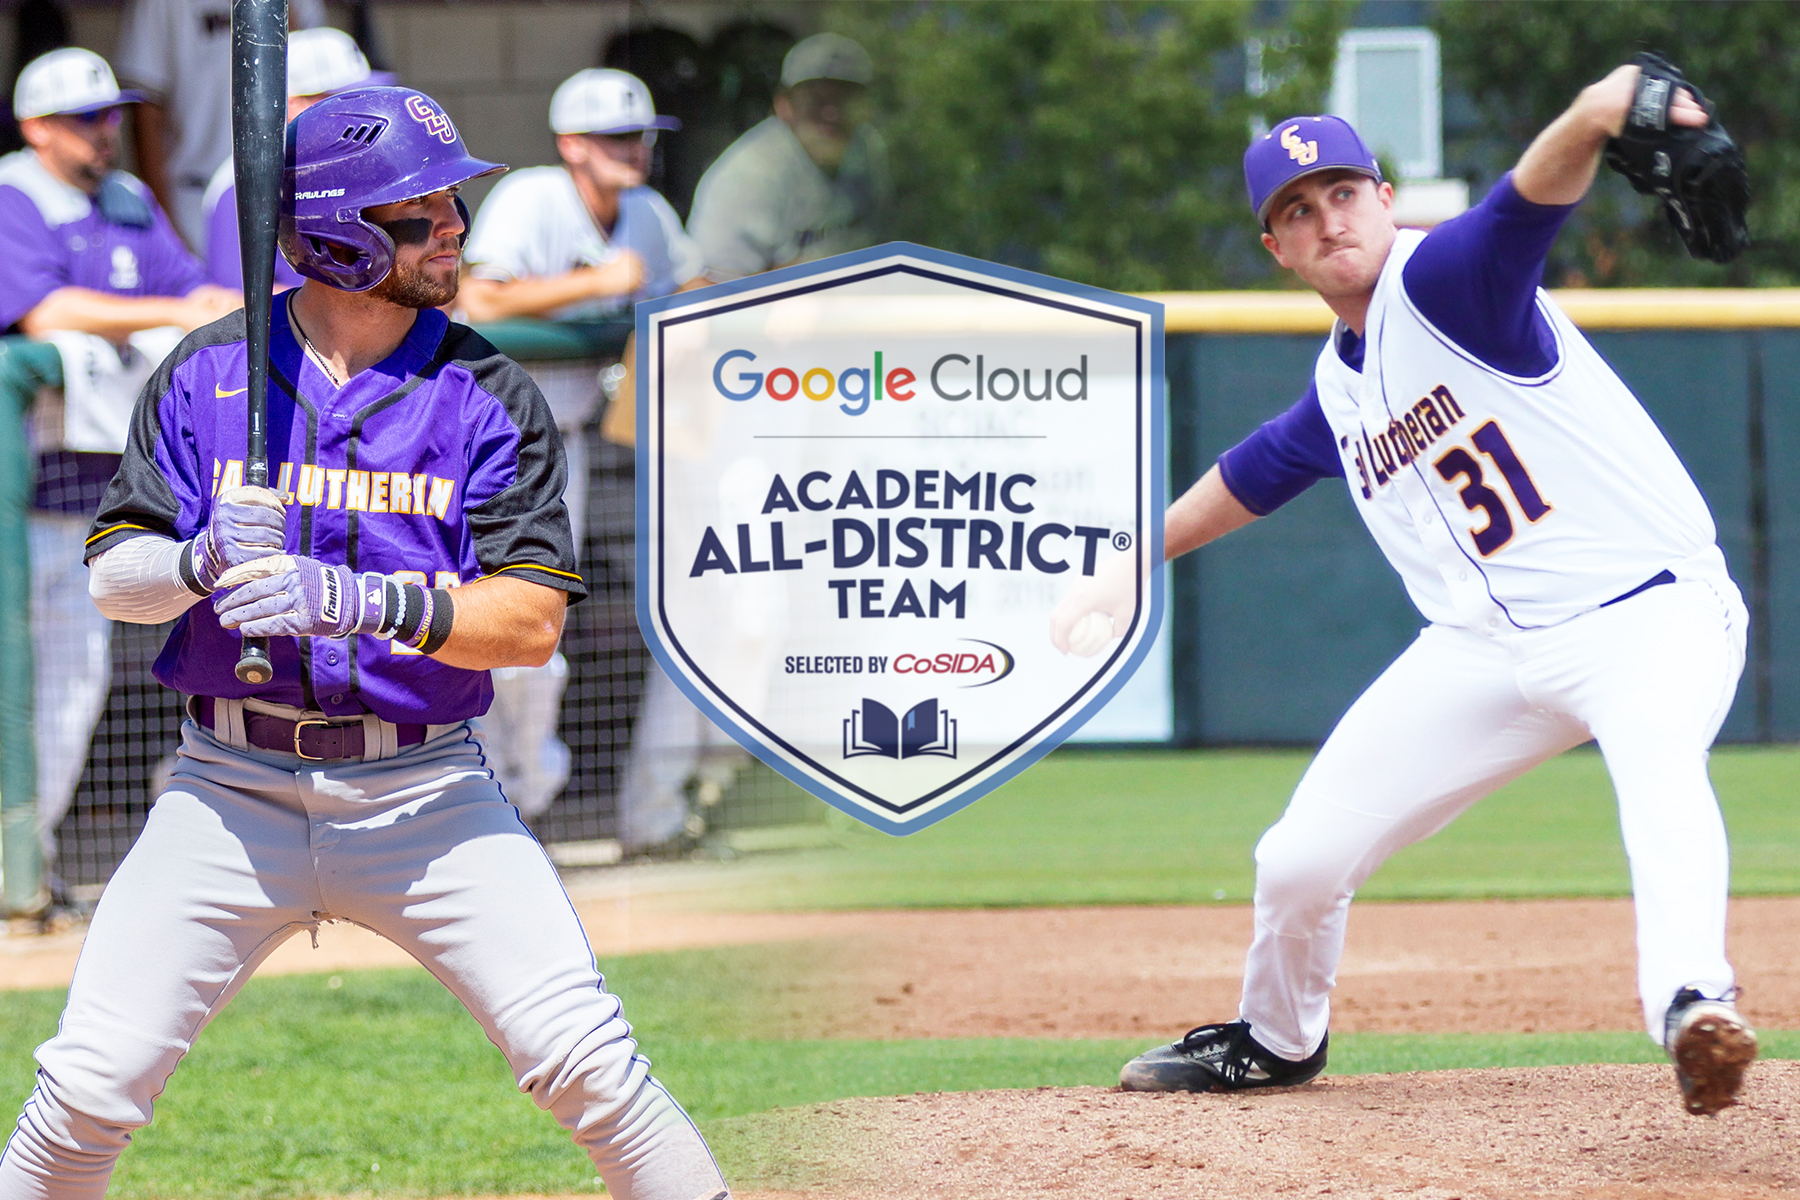 Sidley and Slattery Named to CoSIDA Academic All-District First Team